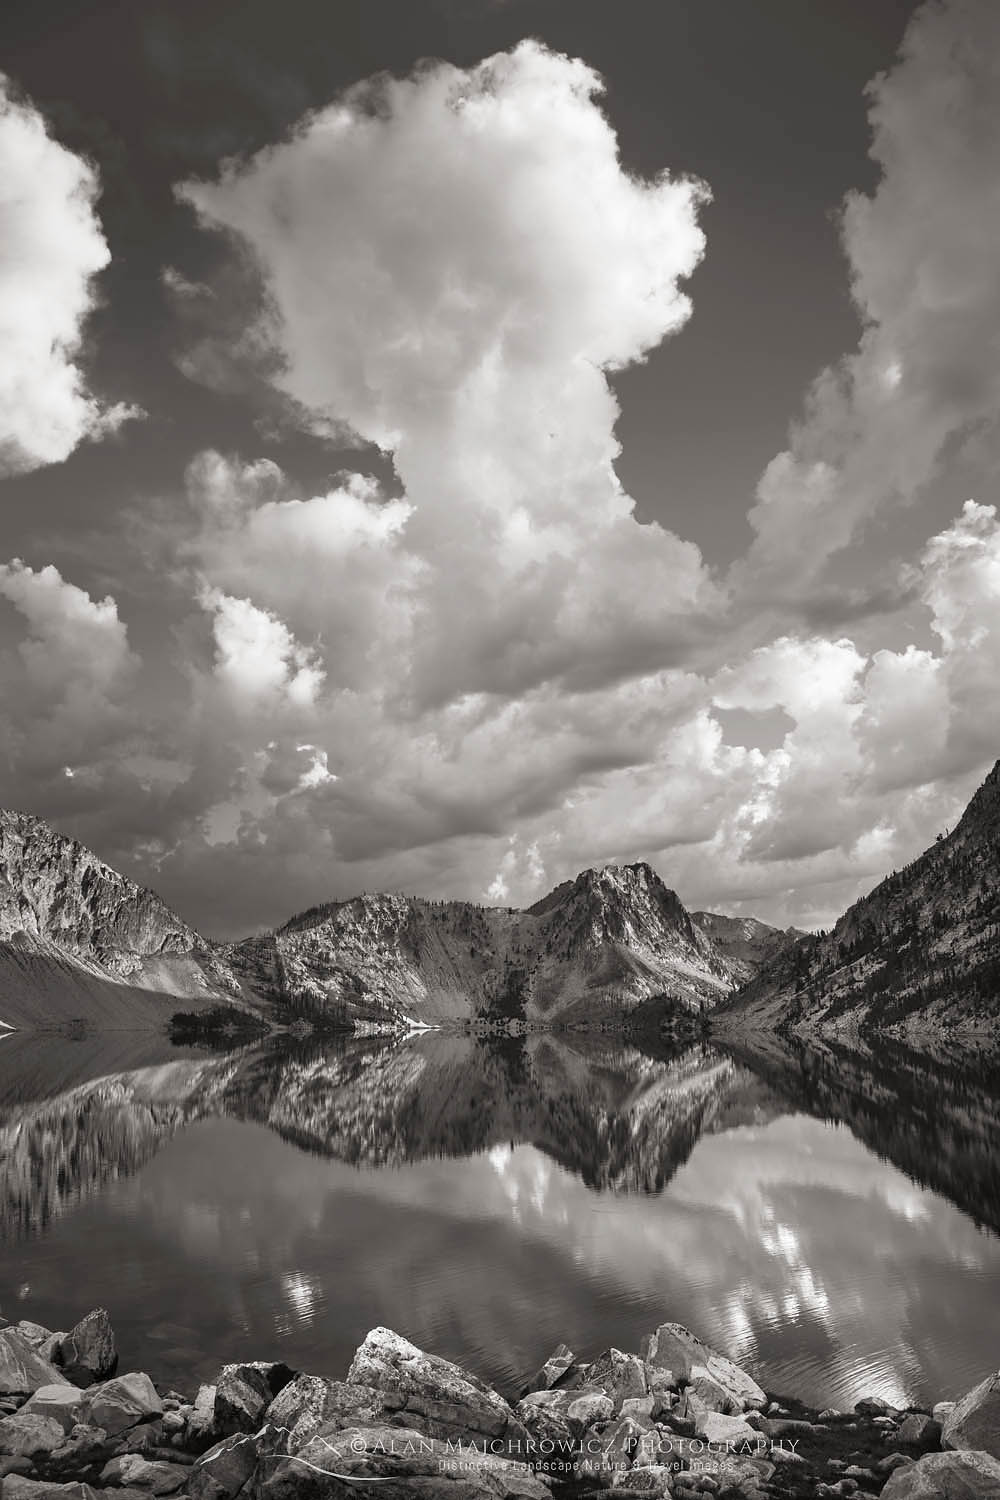 Morning clouds mirrored in still waters of Sawtooth Lake. Sawtooth Mountains Wilderness Idaho #65974bw